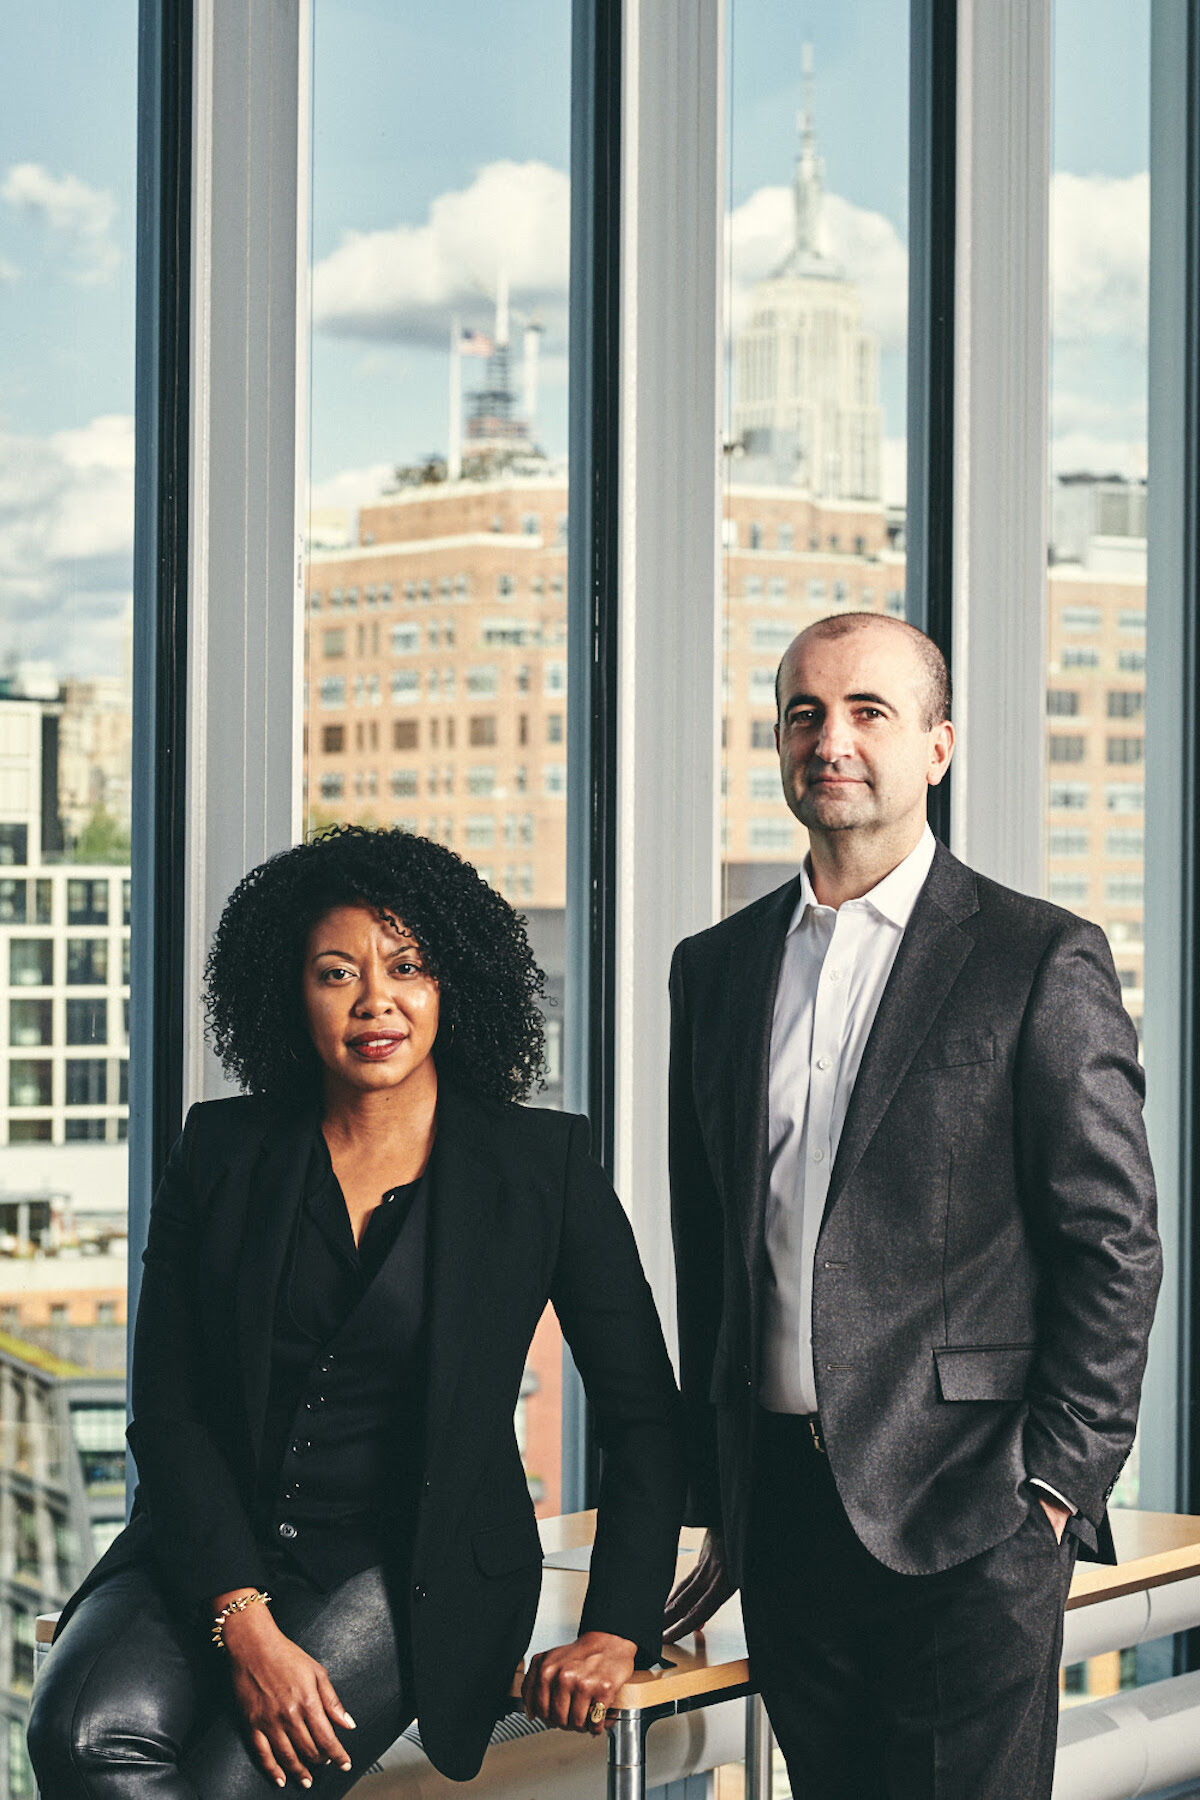 David Breslin and Adrienne Edwards, who will co-curate the 2021 Whitney Biennial. Photo by Bryan Derballa. Courtesy the Whitney Museum of American Art.